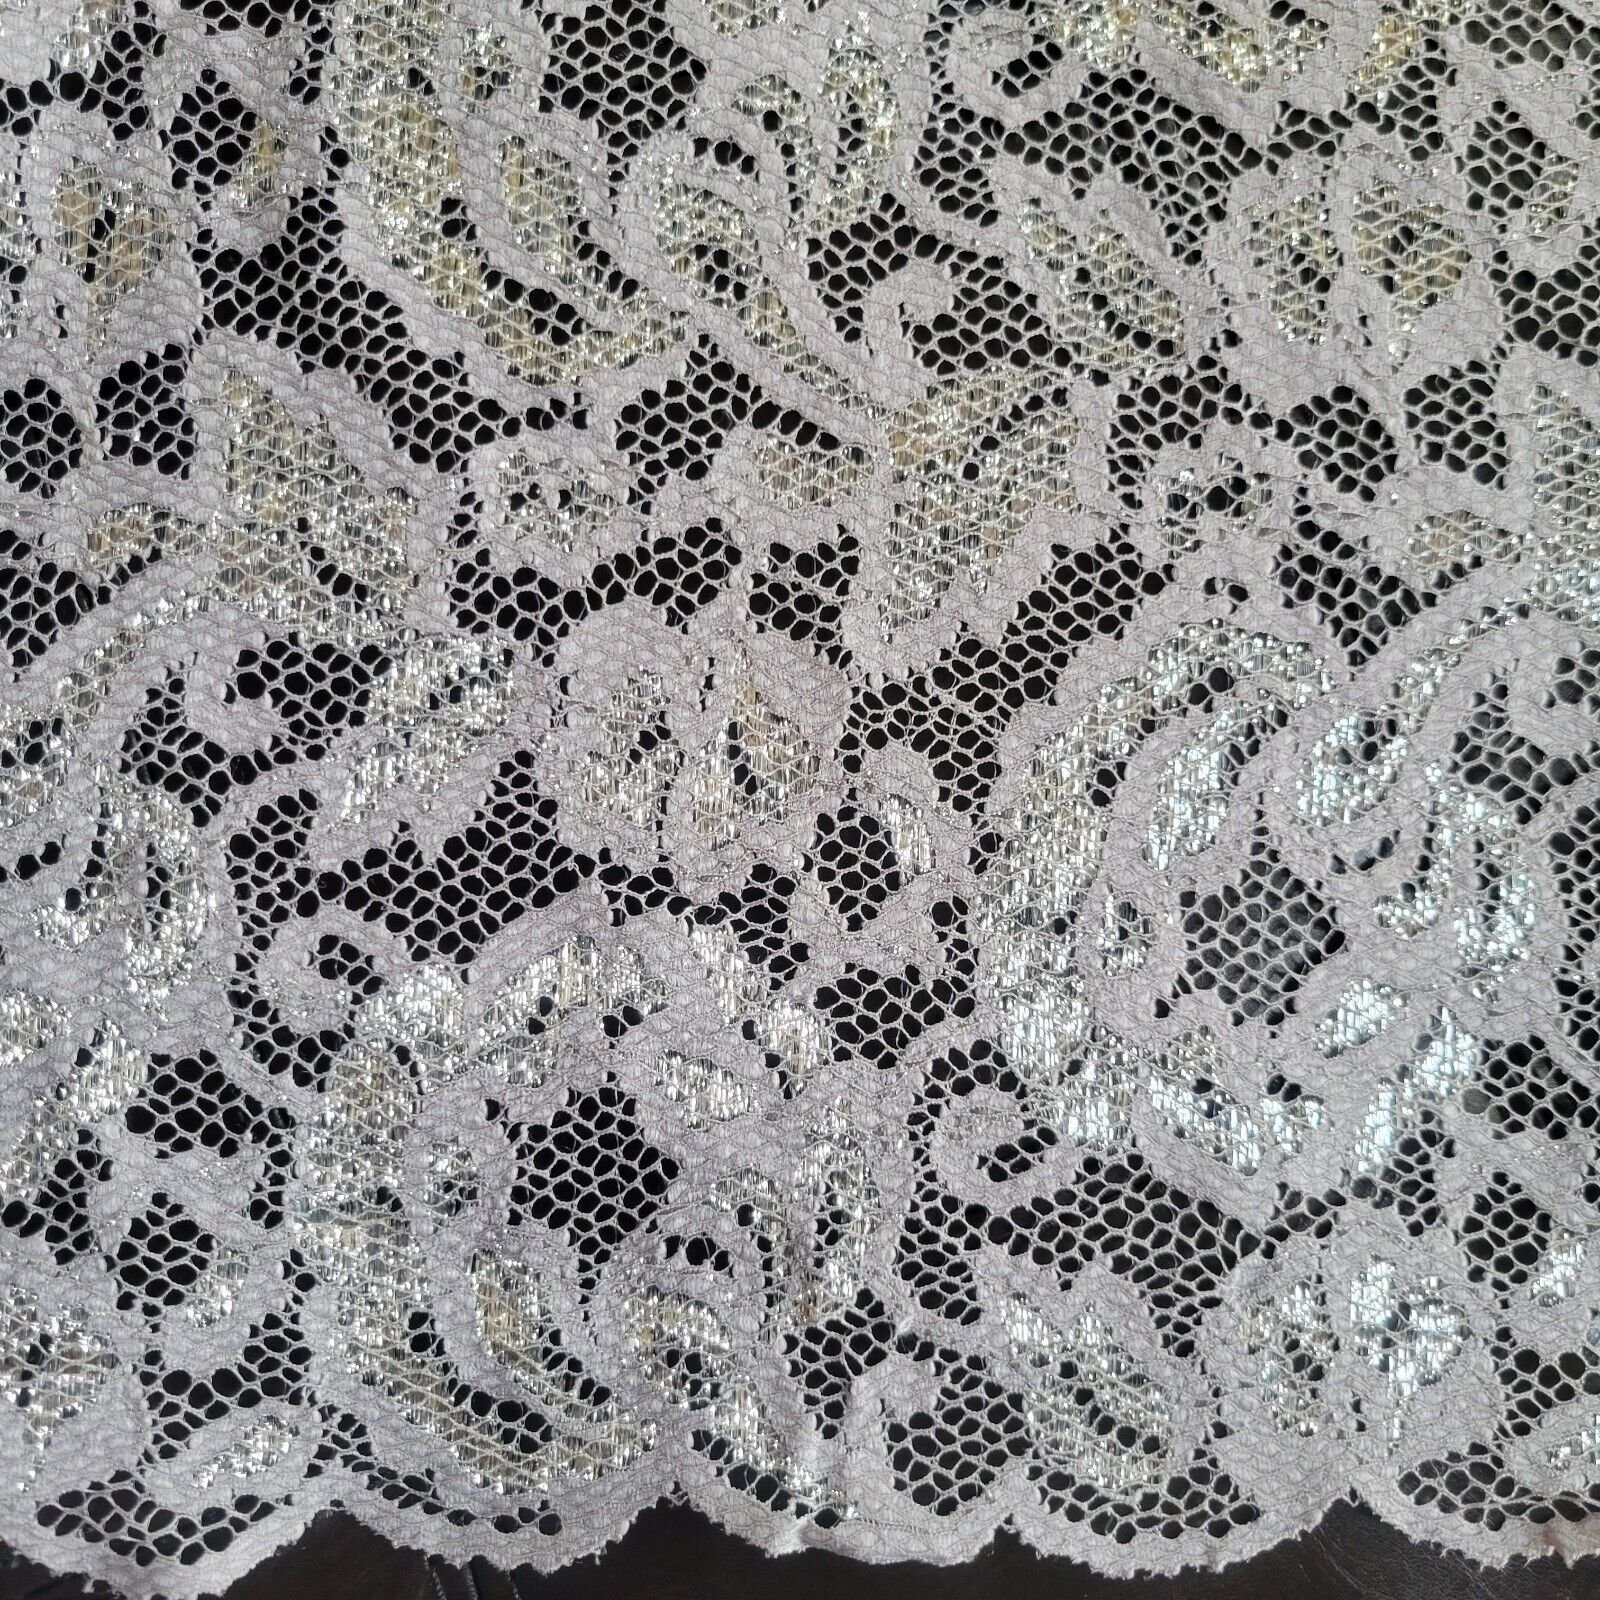 Gray & Metallic Silver Double-Scalloped 2-Way Stretch Lace - Designer  Overstock! - Beautiful Textiles